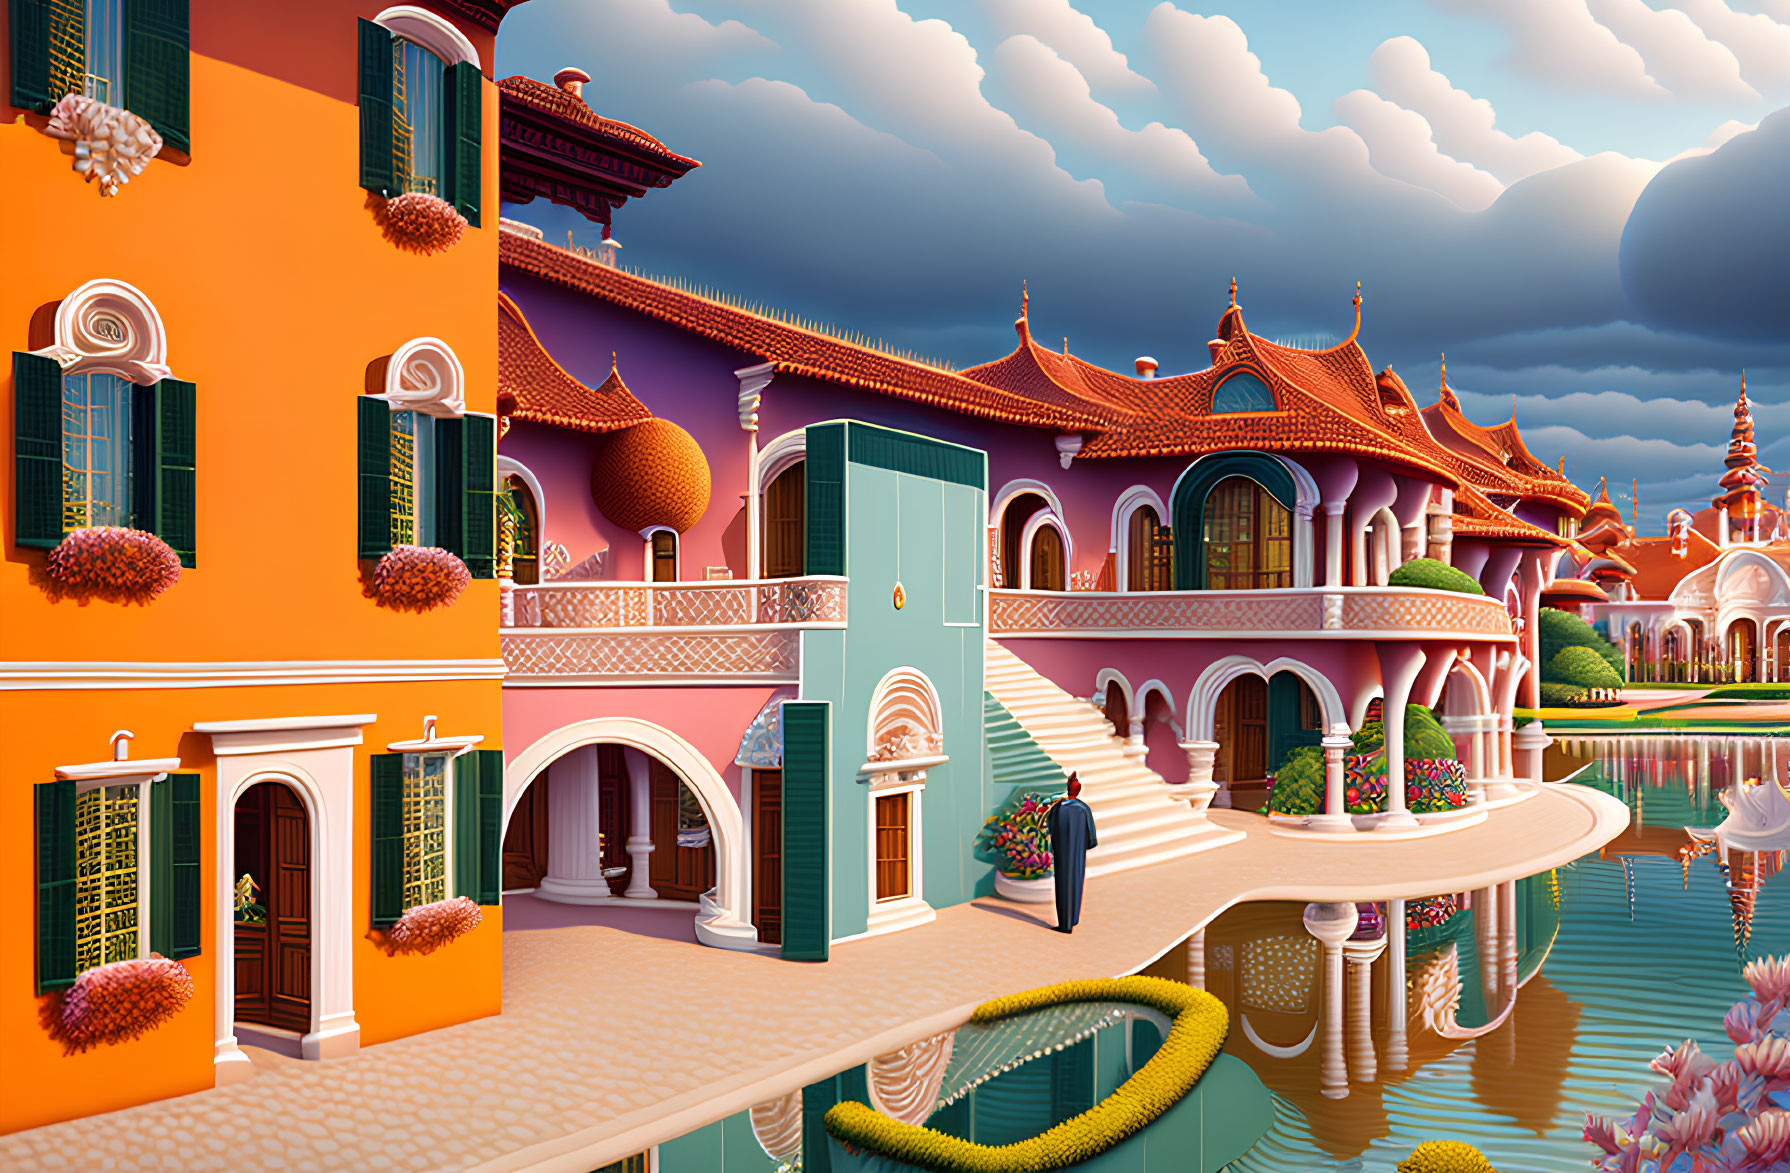 Colorful illustration of orange and pink architectural landscape with ornate buildings, reflective water, and floating green